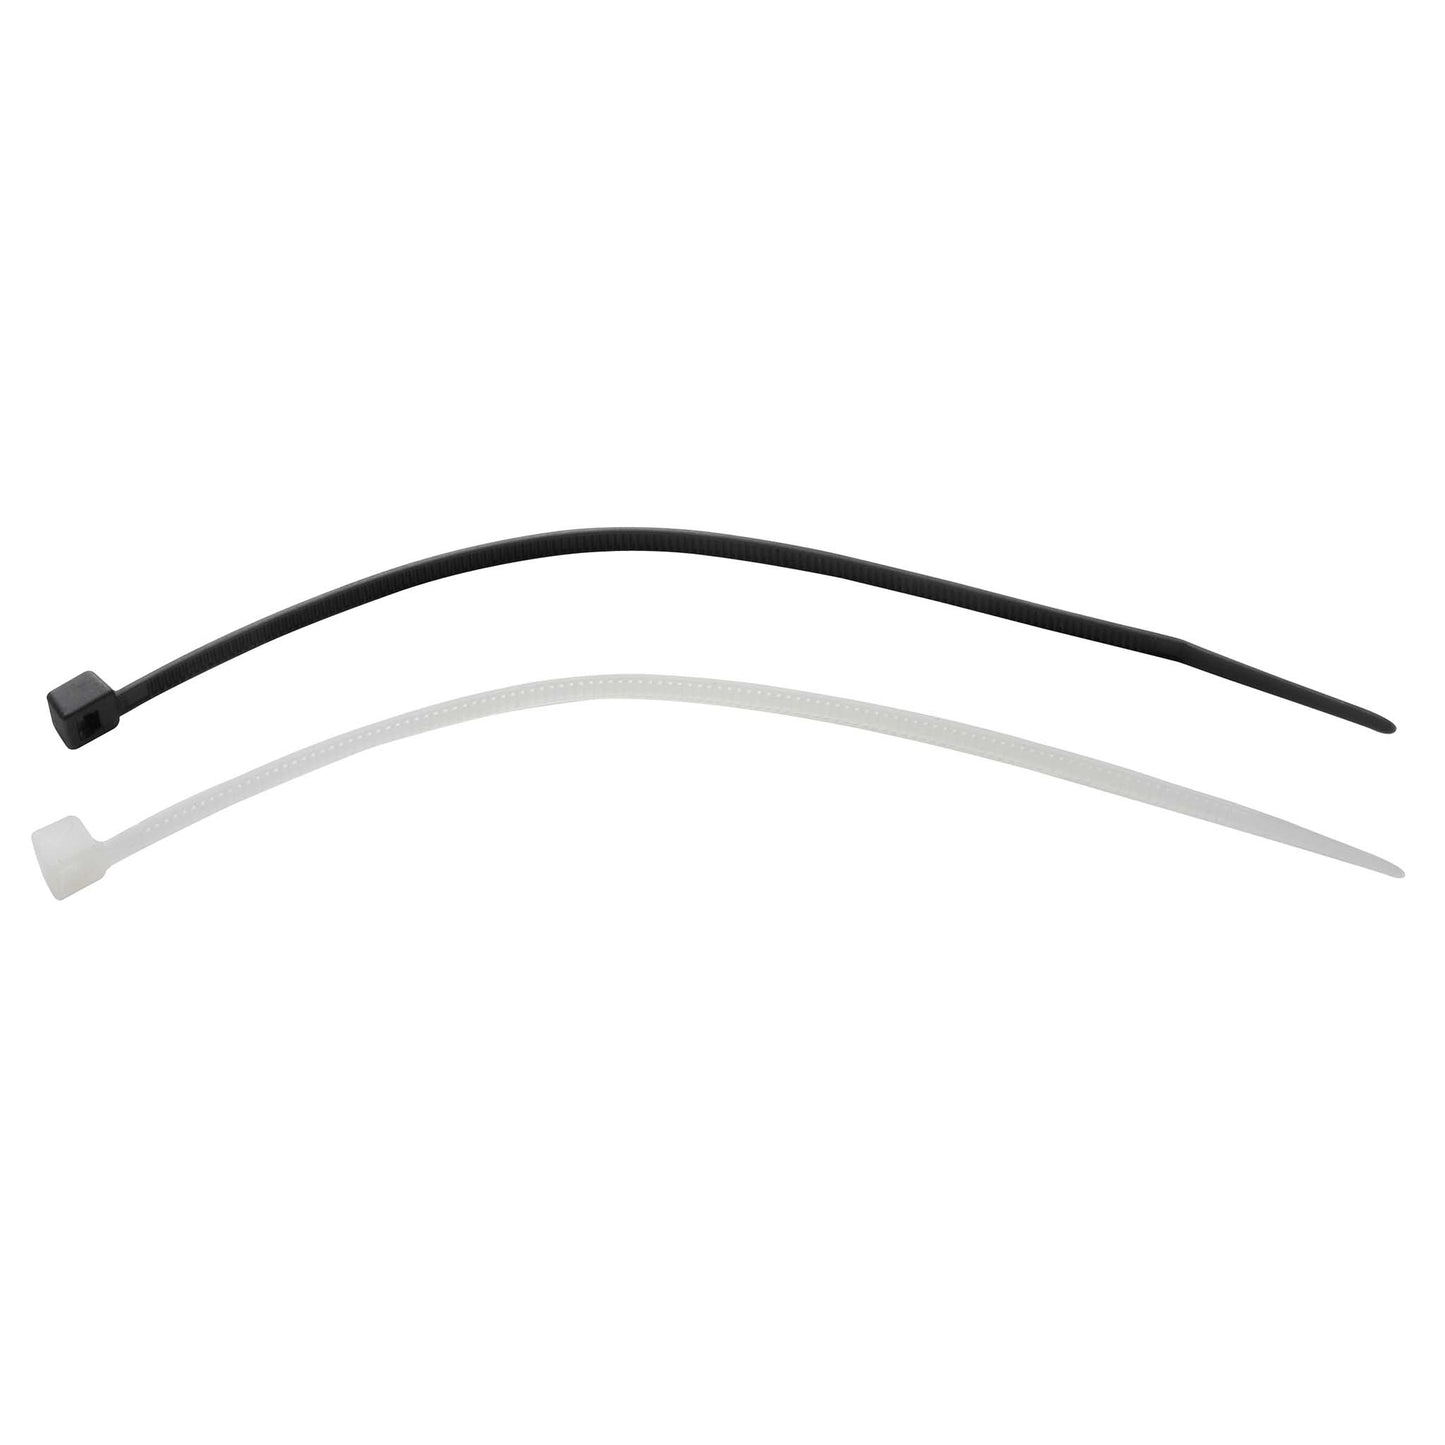 Cable ties 200 x 4.8 mm - transparent